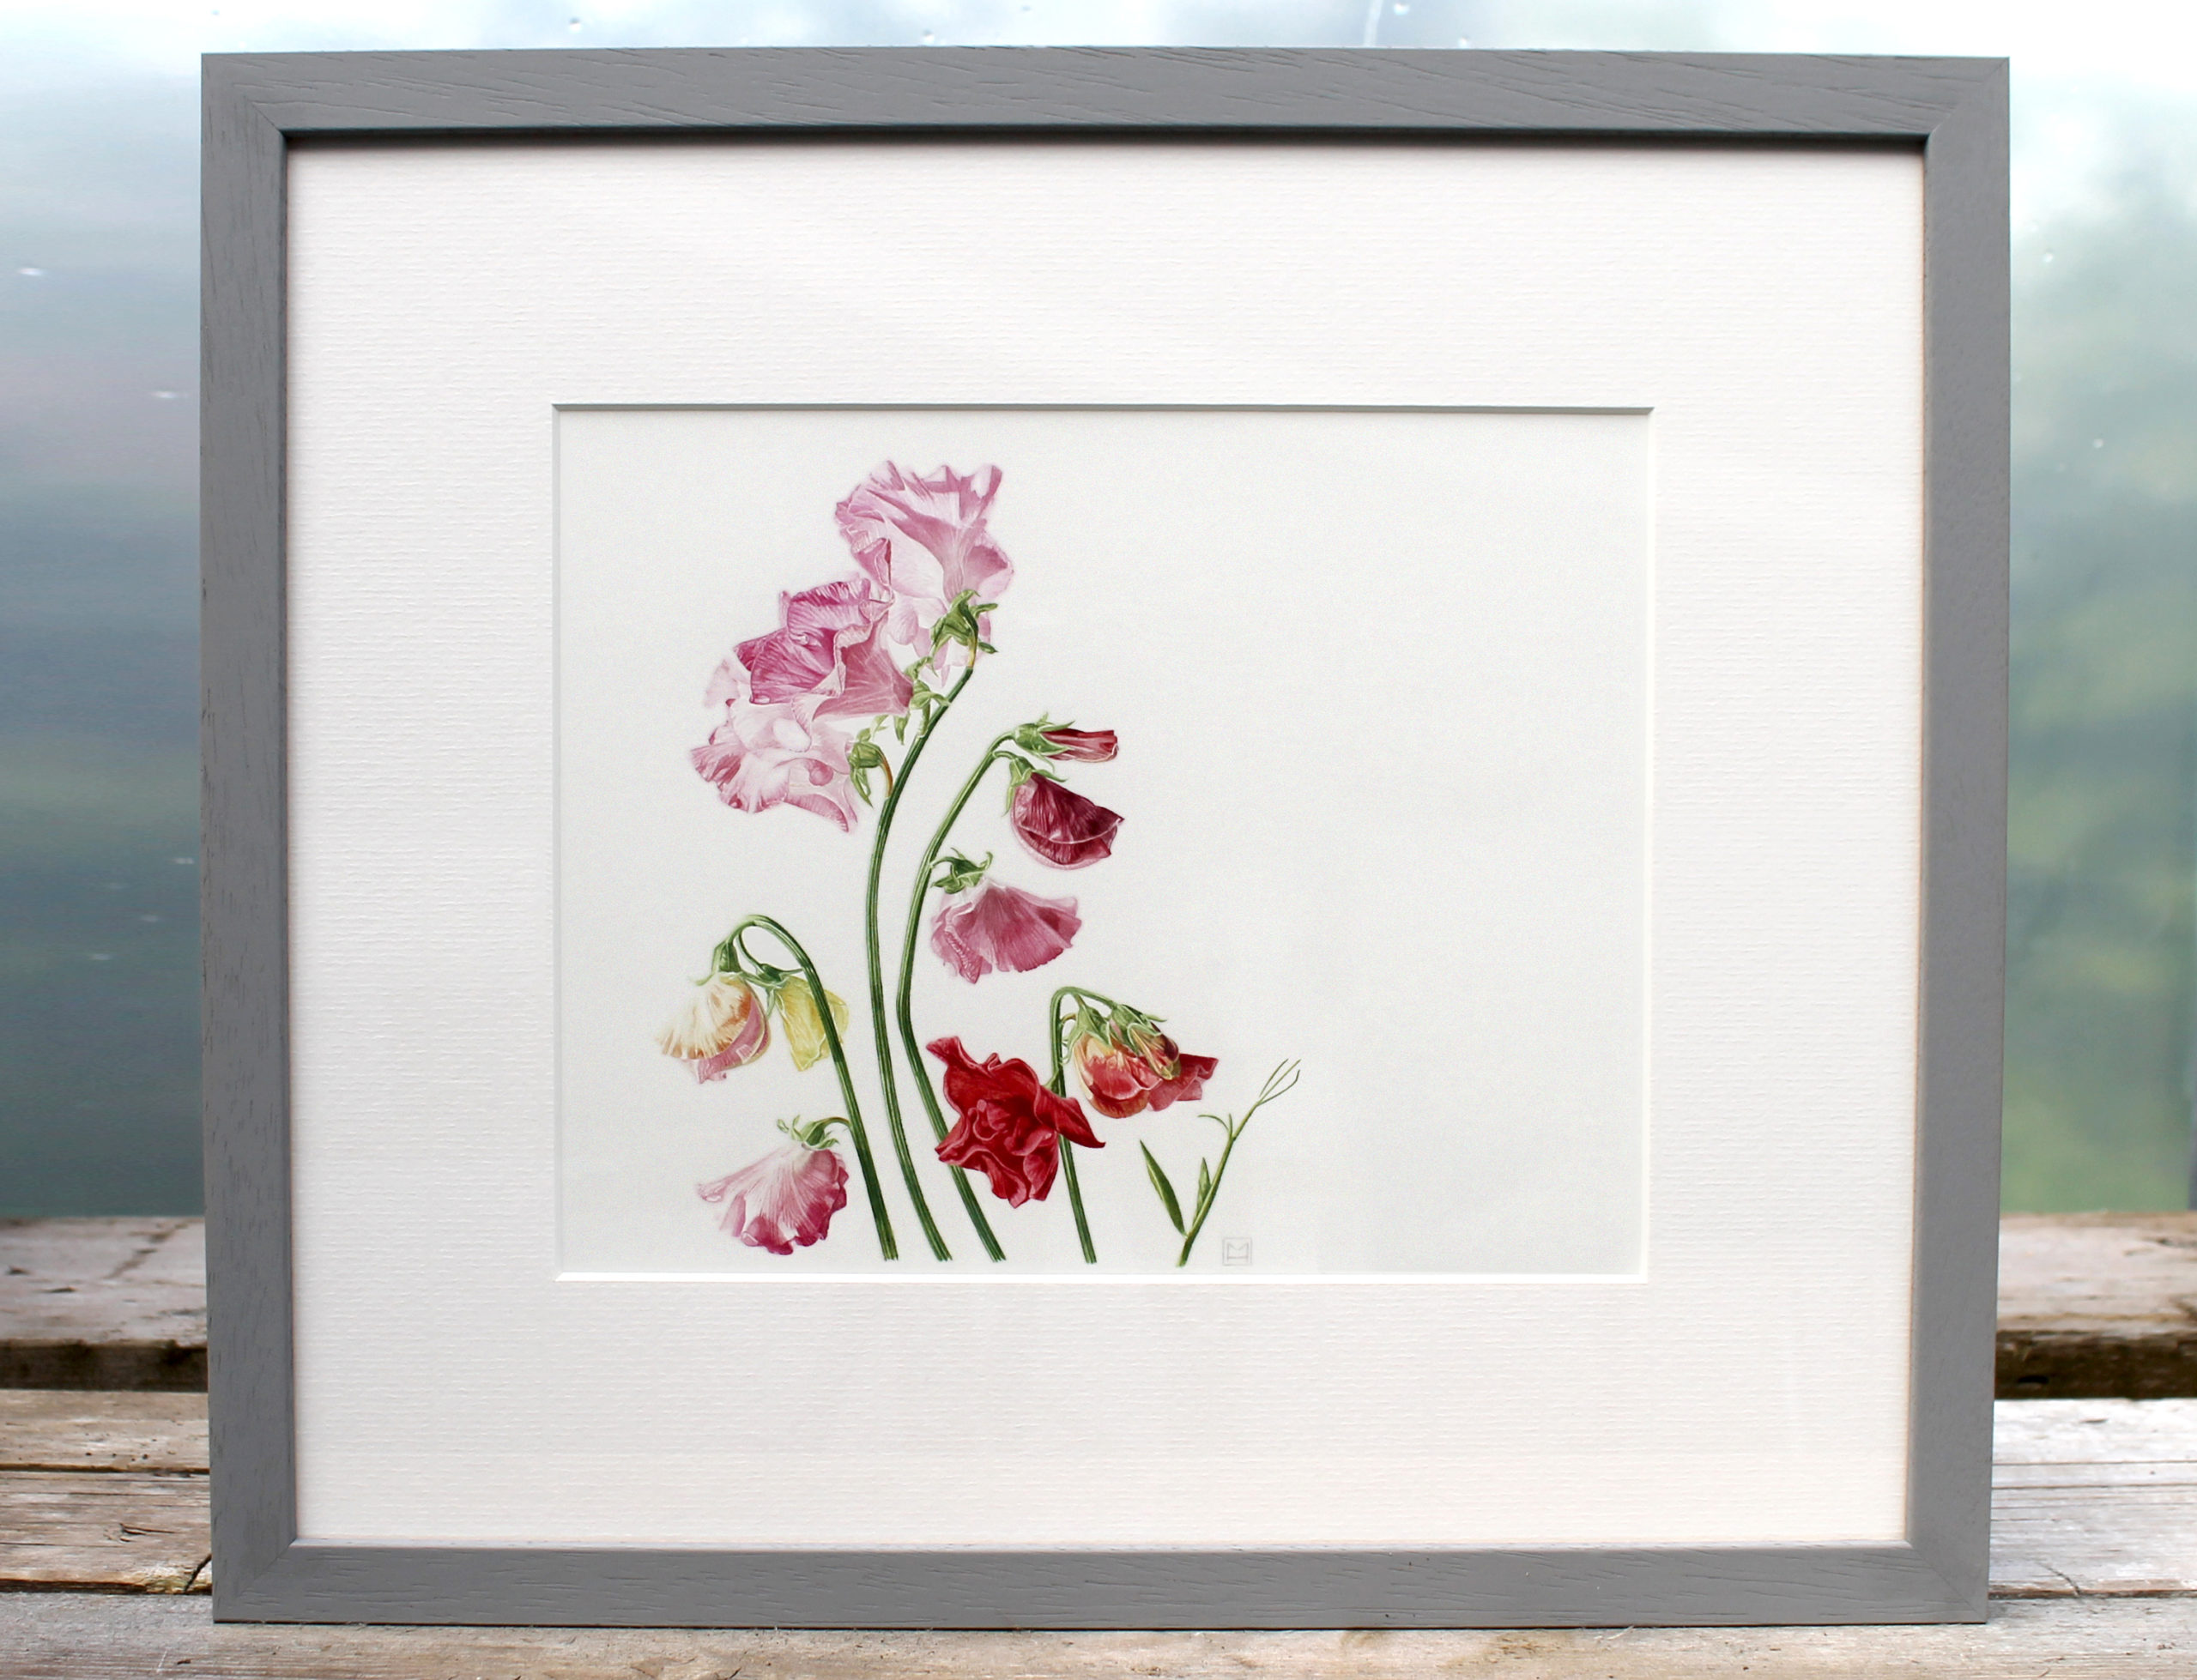 Sweet peas for Margaret, watercolour painting by Marianne Hazlewood